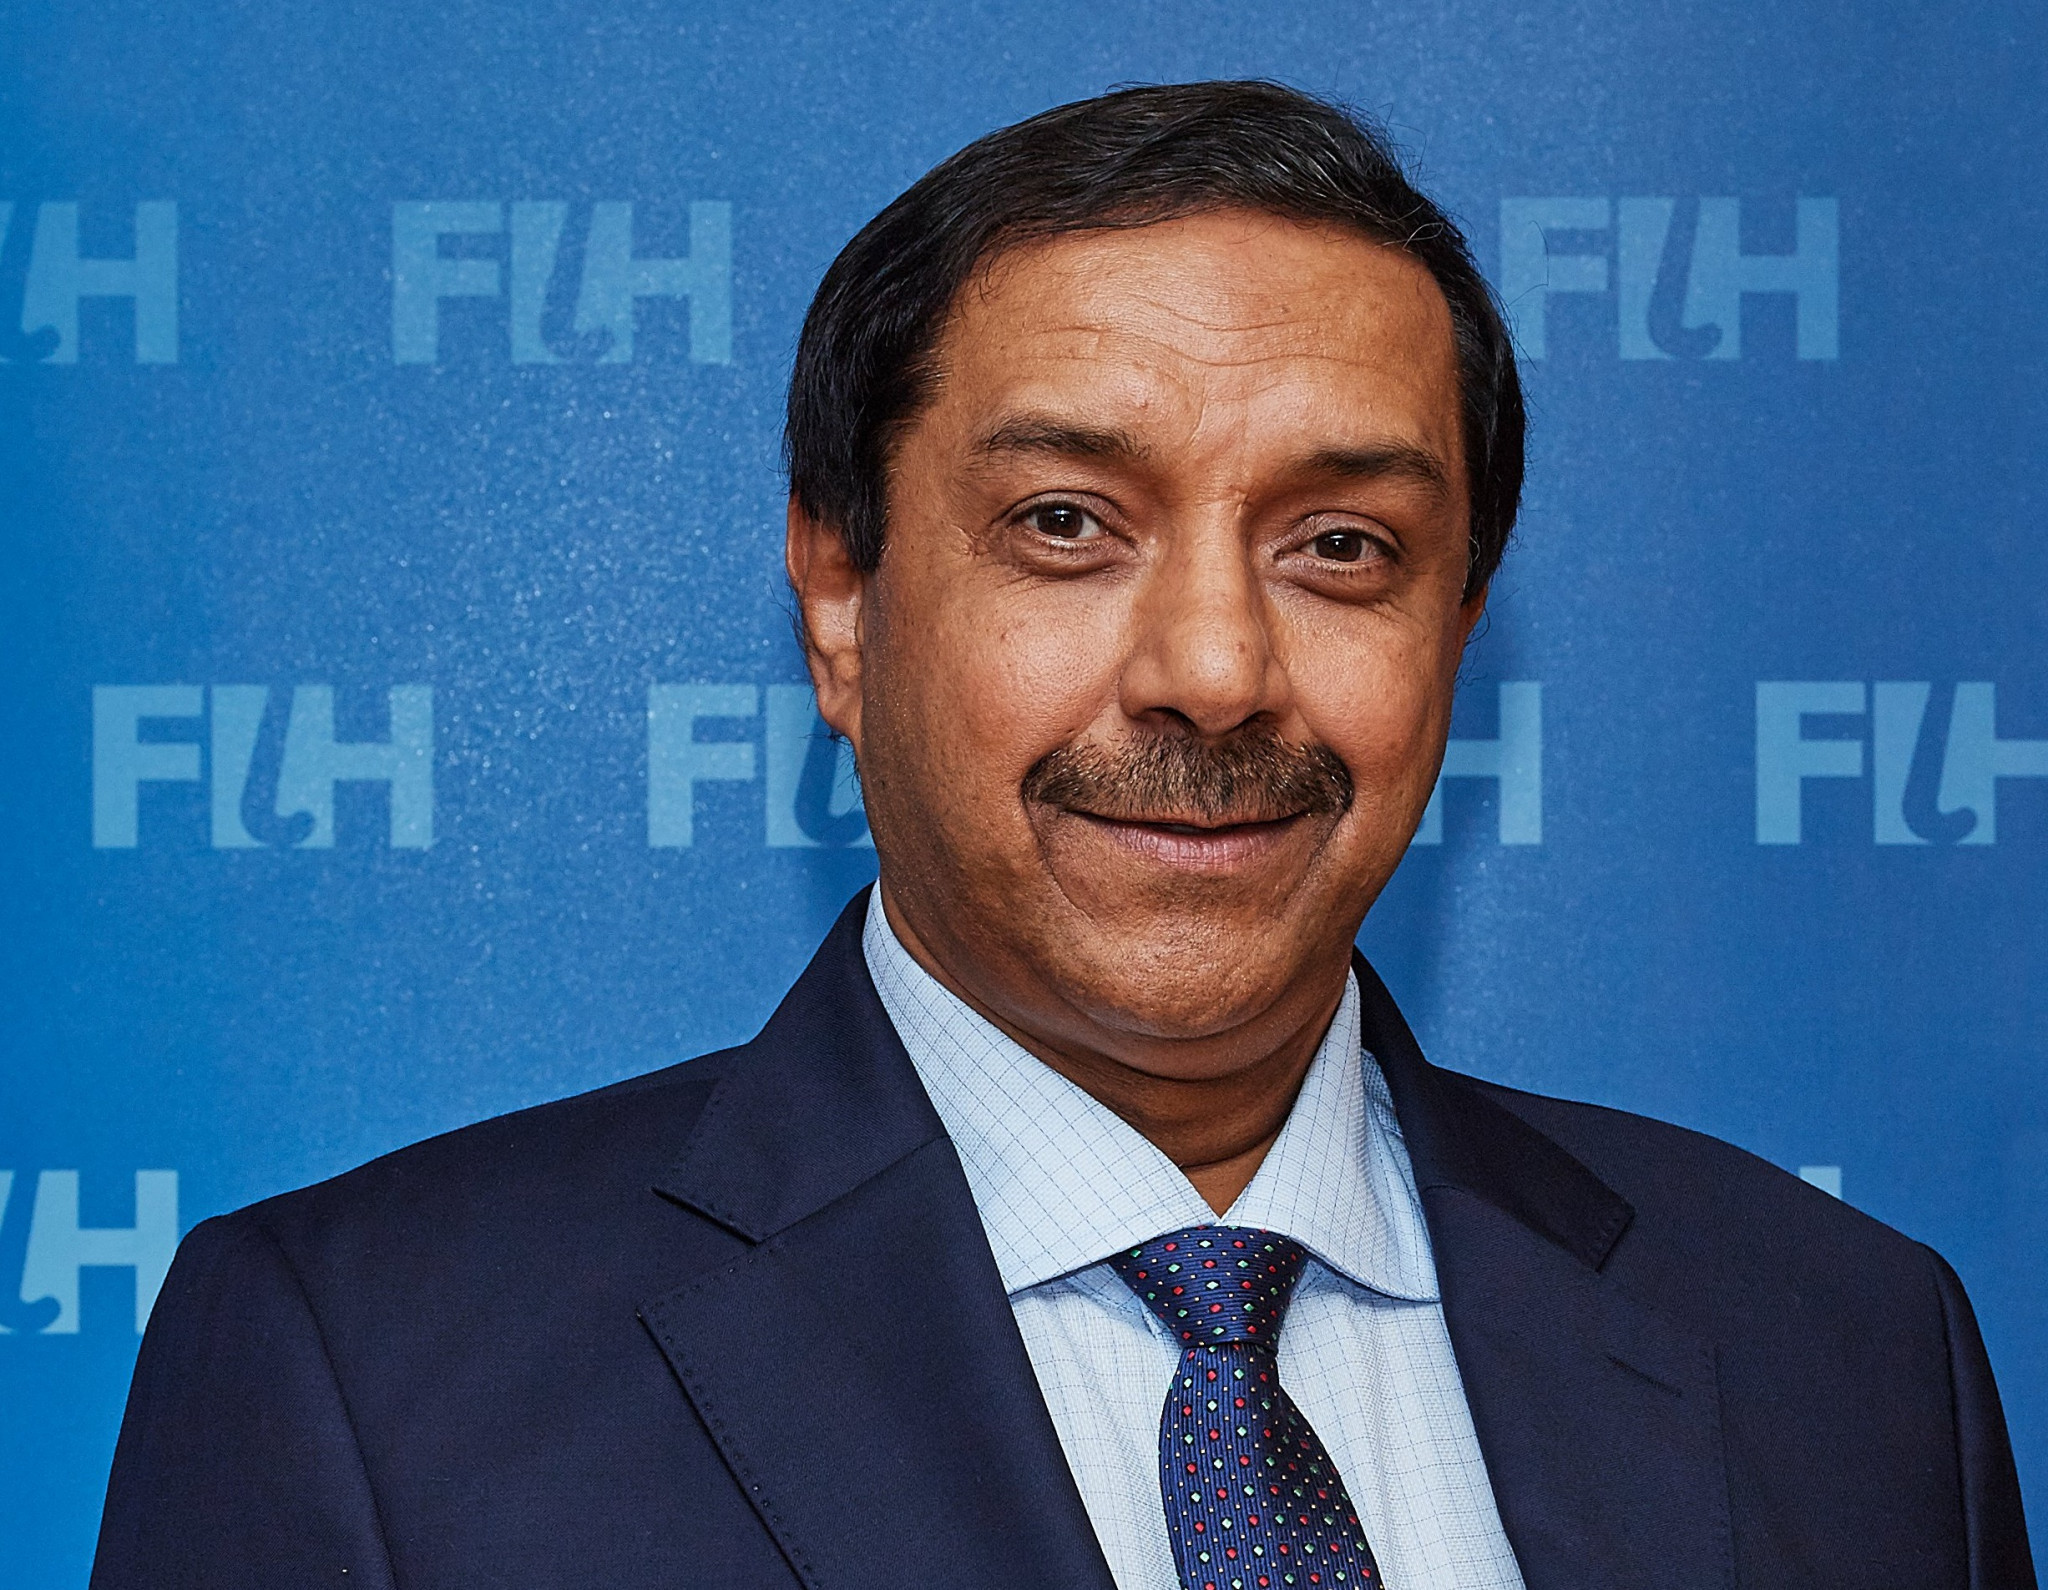 New FIH President Ikram rules out expanding World Cup and hails "great bridge" of Hockey5s